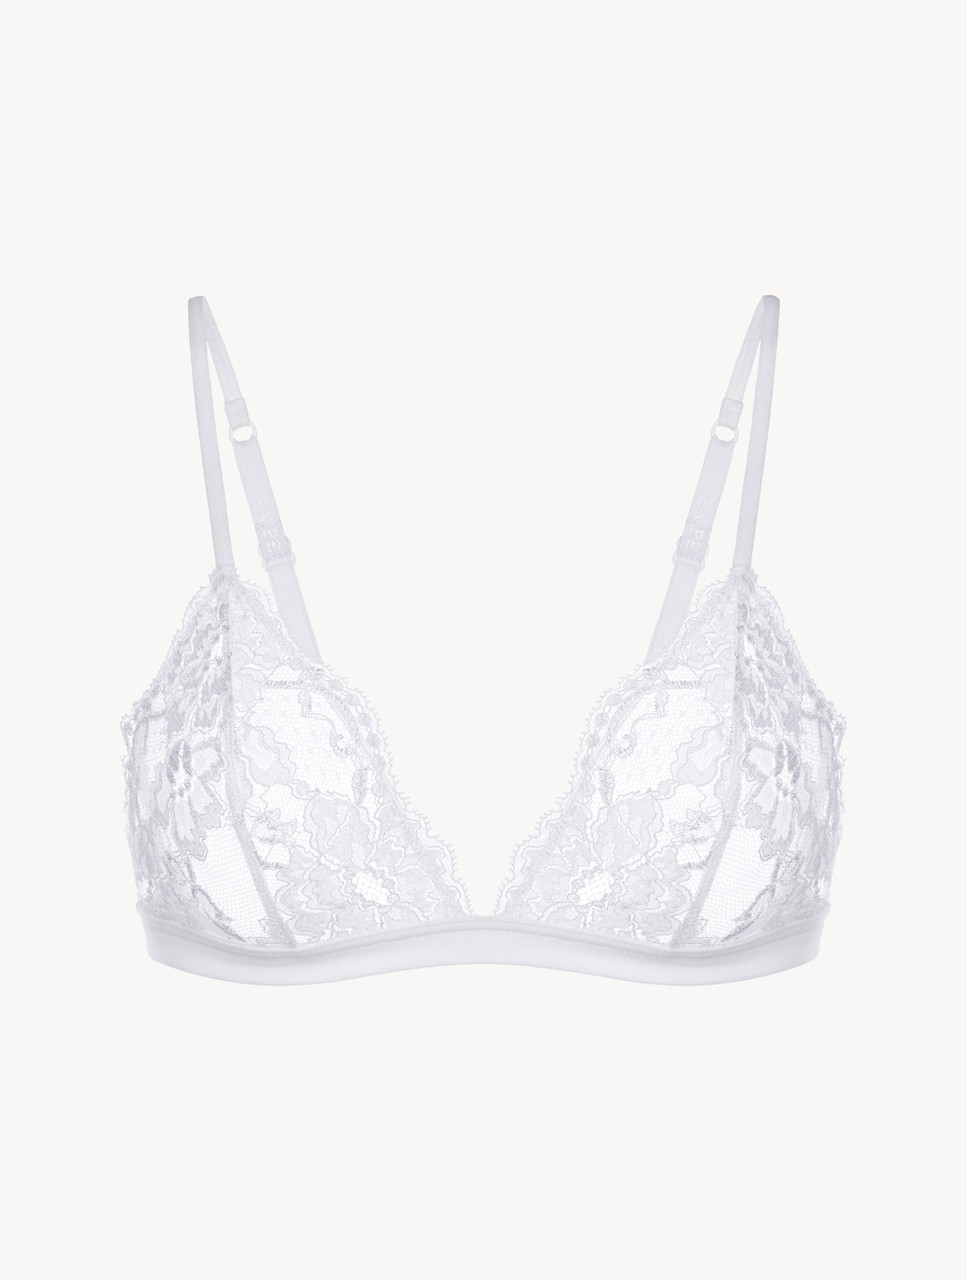 Dorothee Lace Triangle Bra | Blue